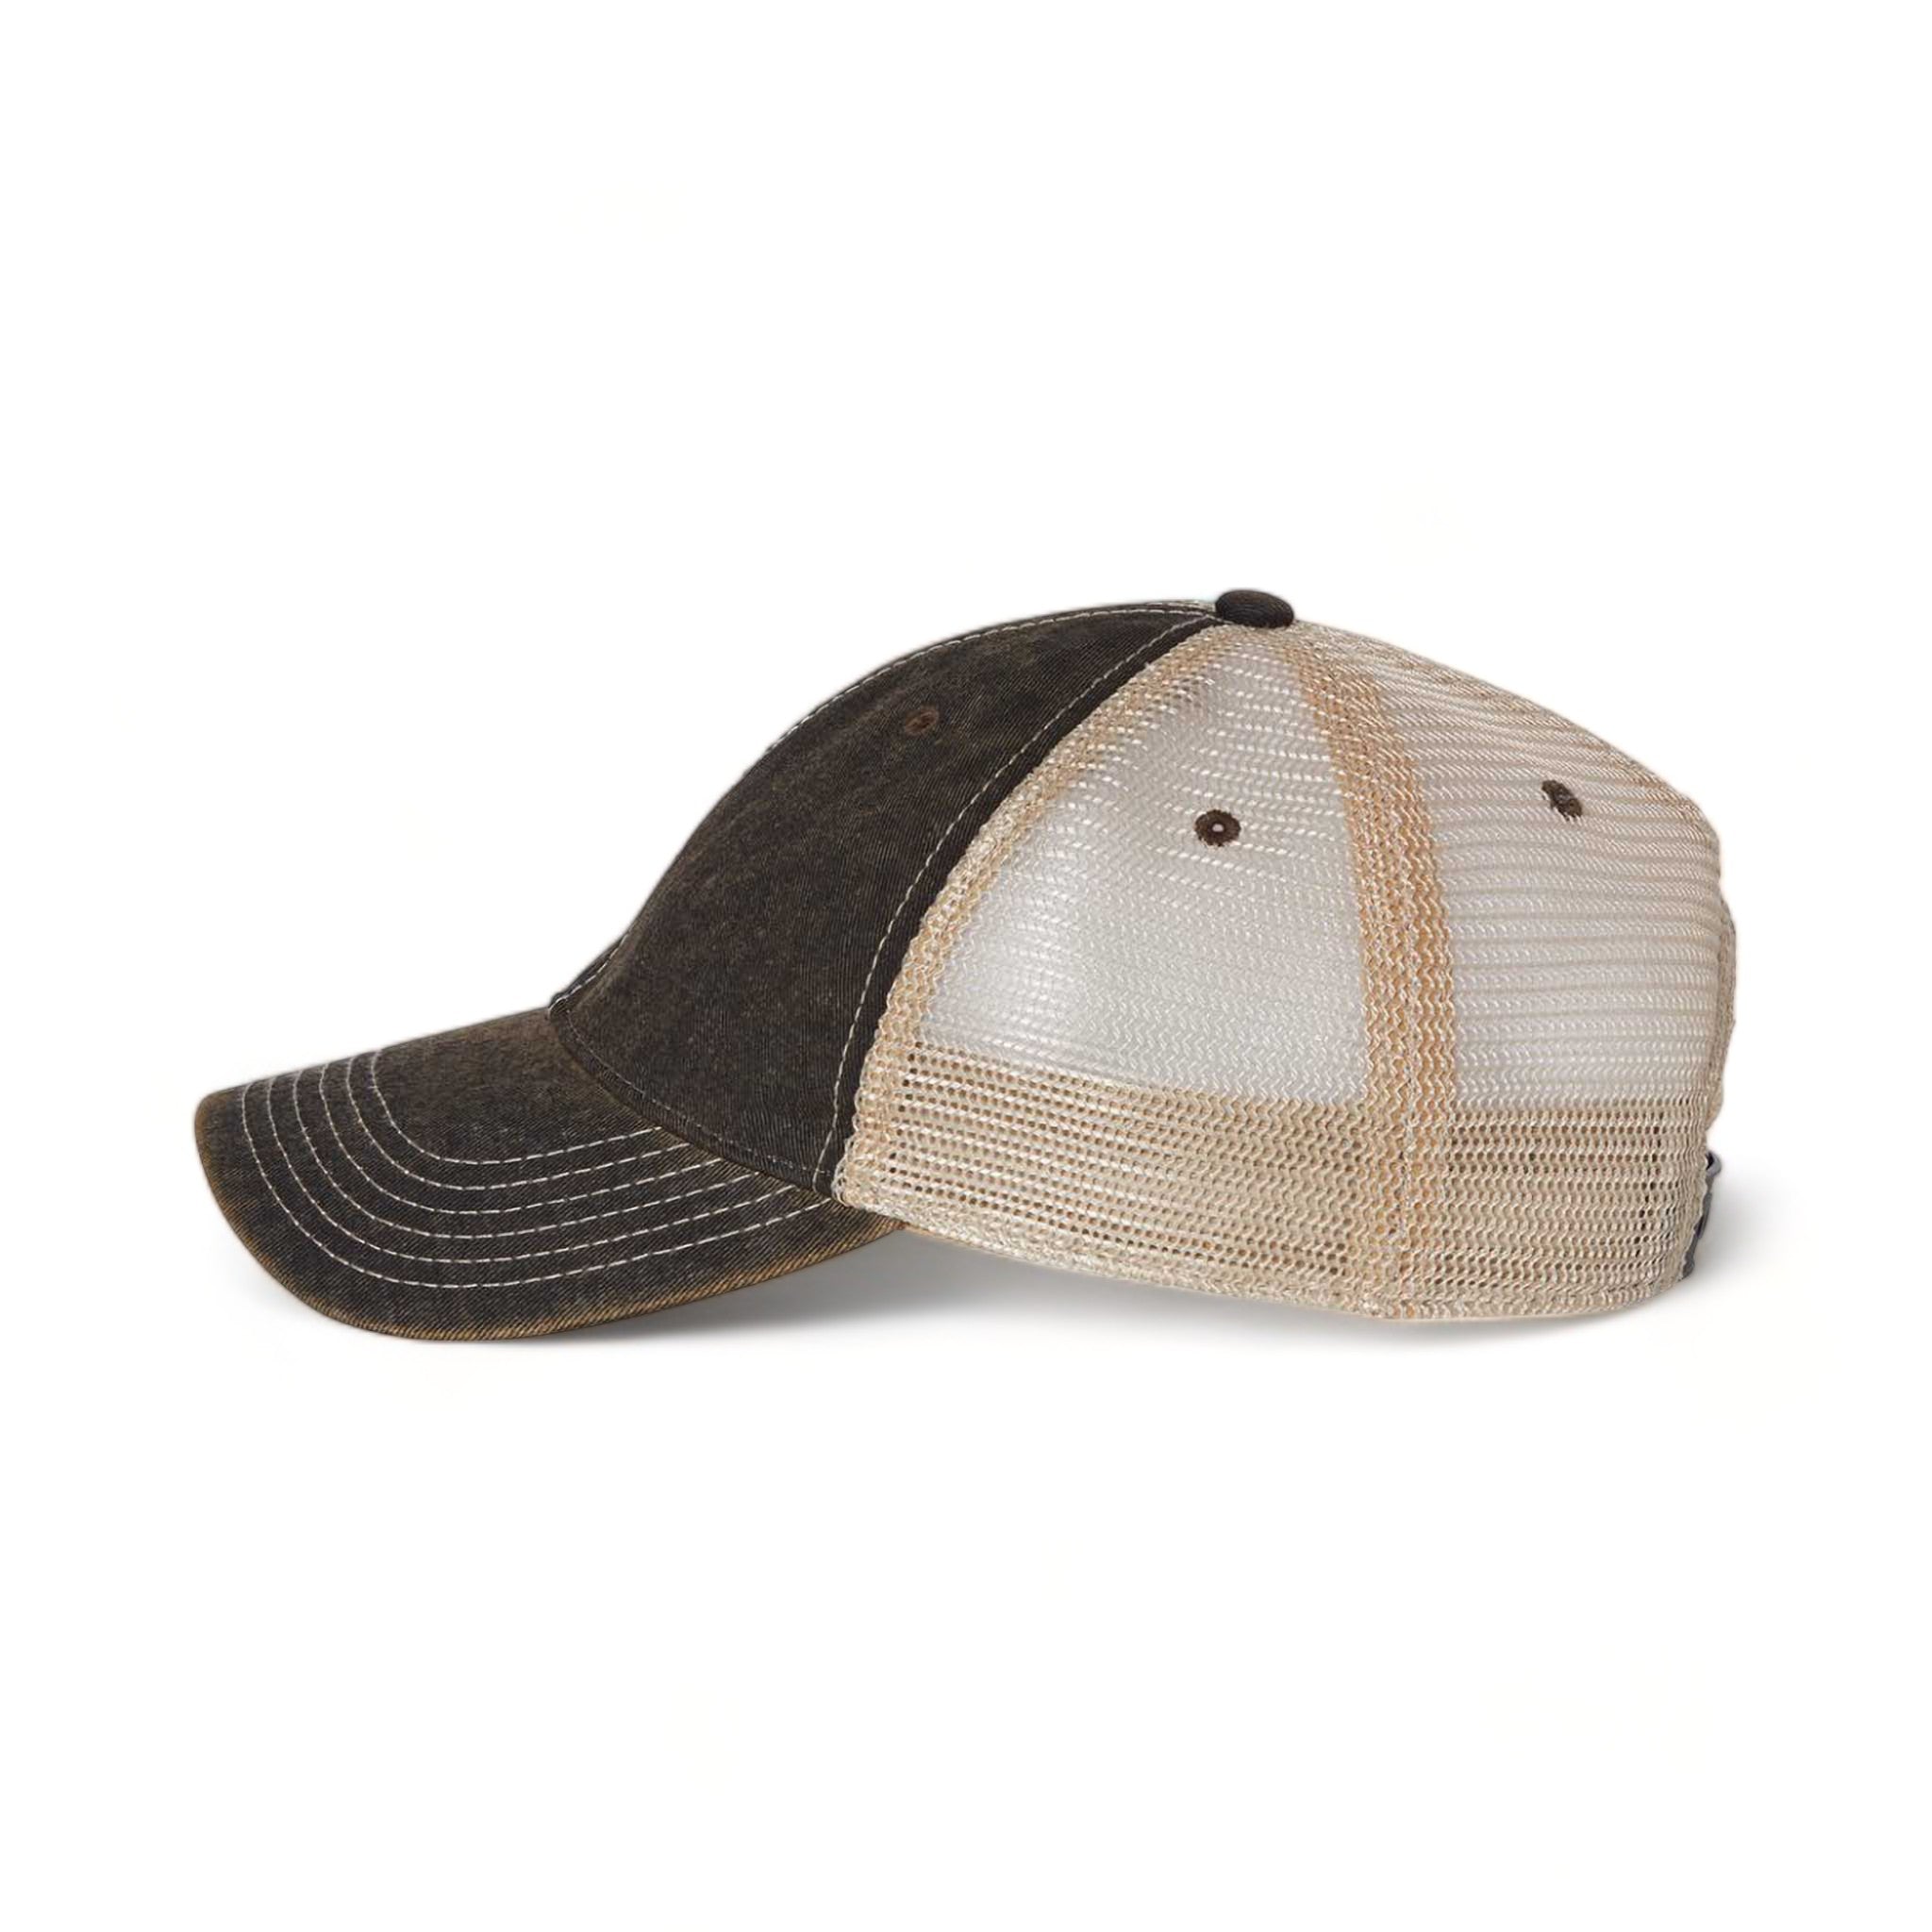 Side view of LEGACY OFA custom hat in black and khaki